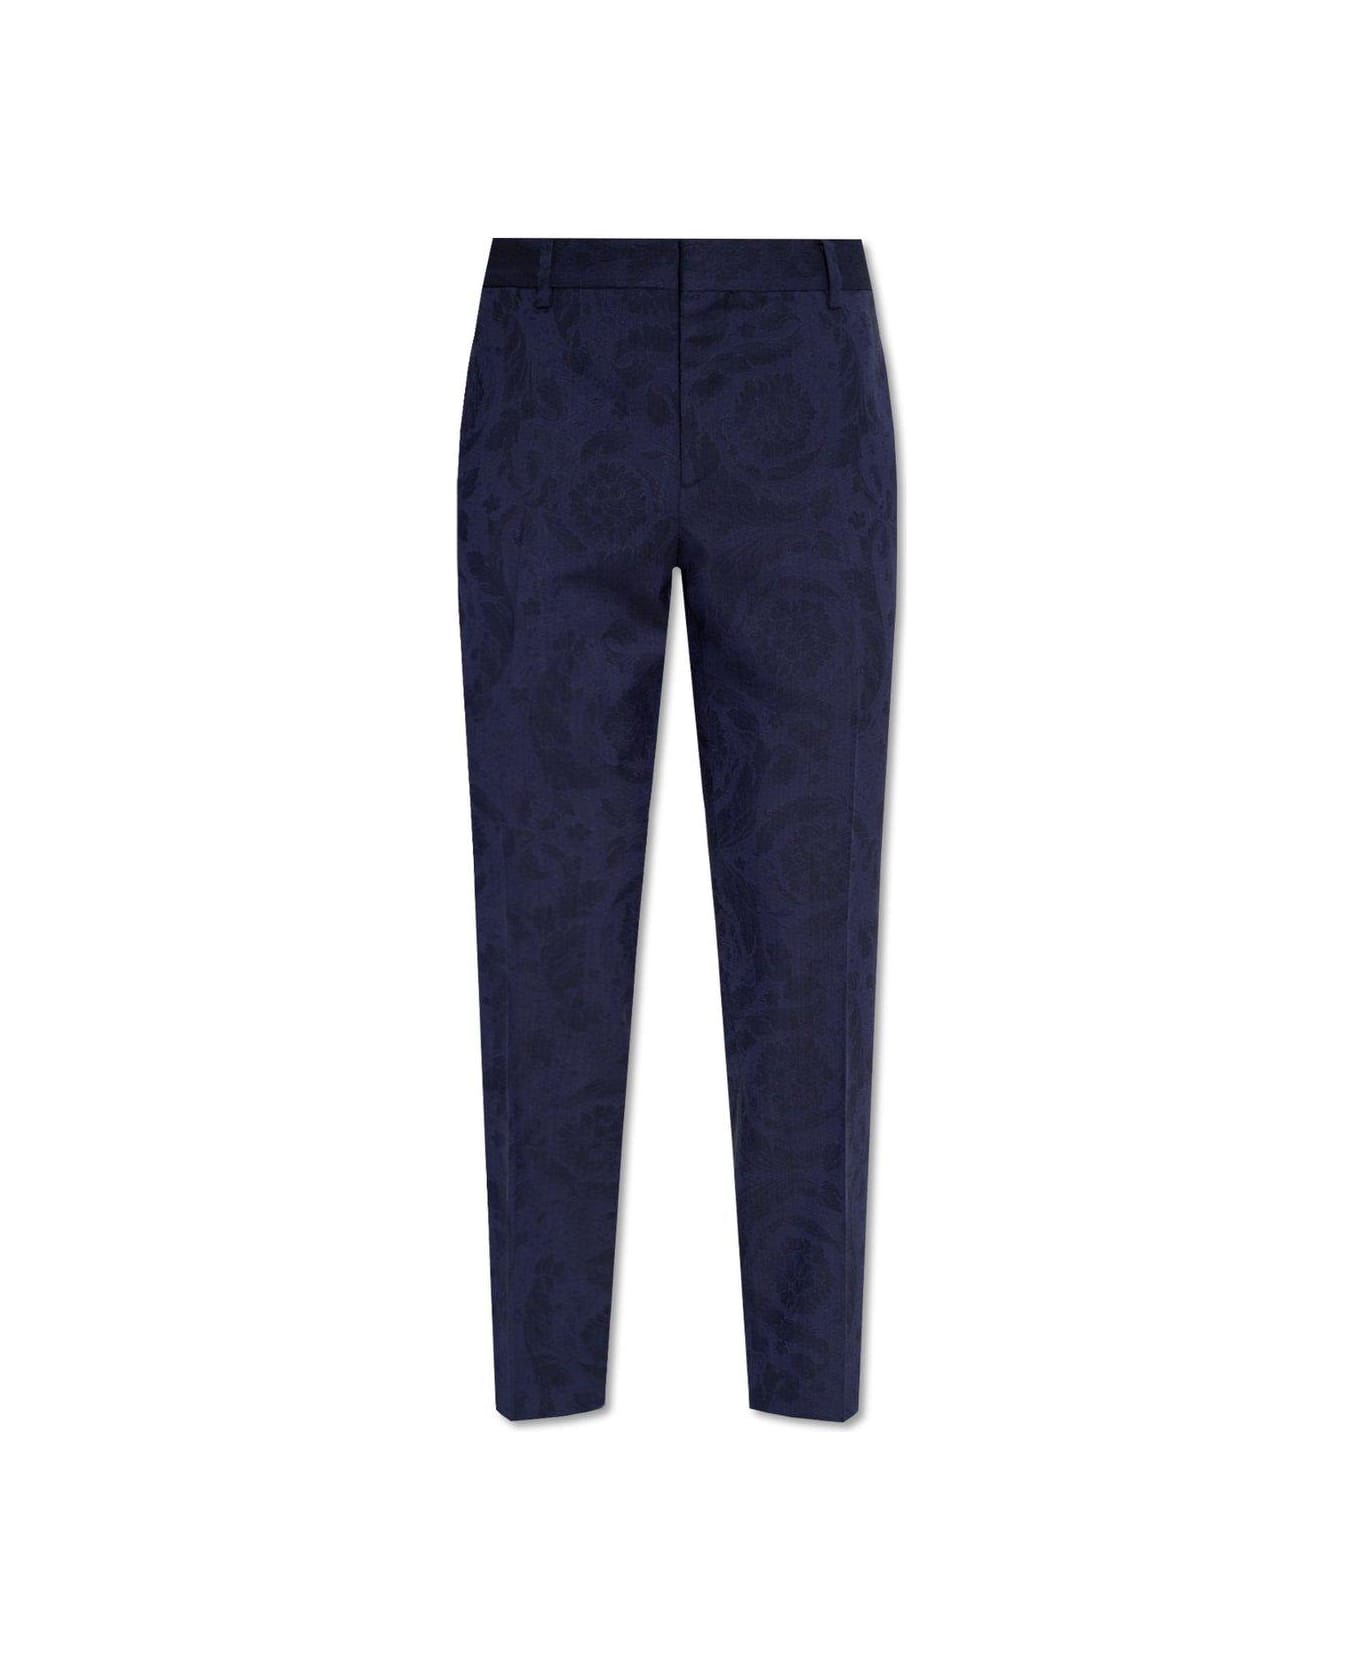 Versace Pleated Tailored Trousers - Blue ボトムス